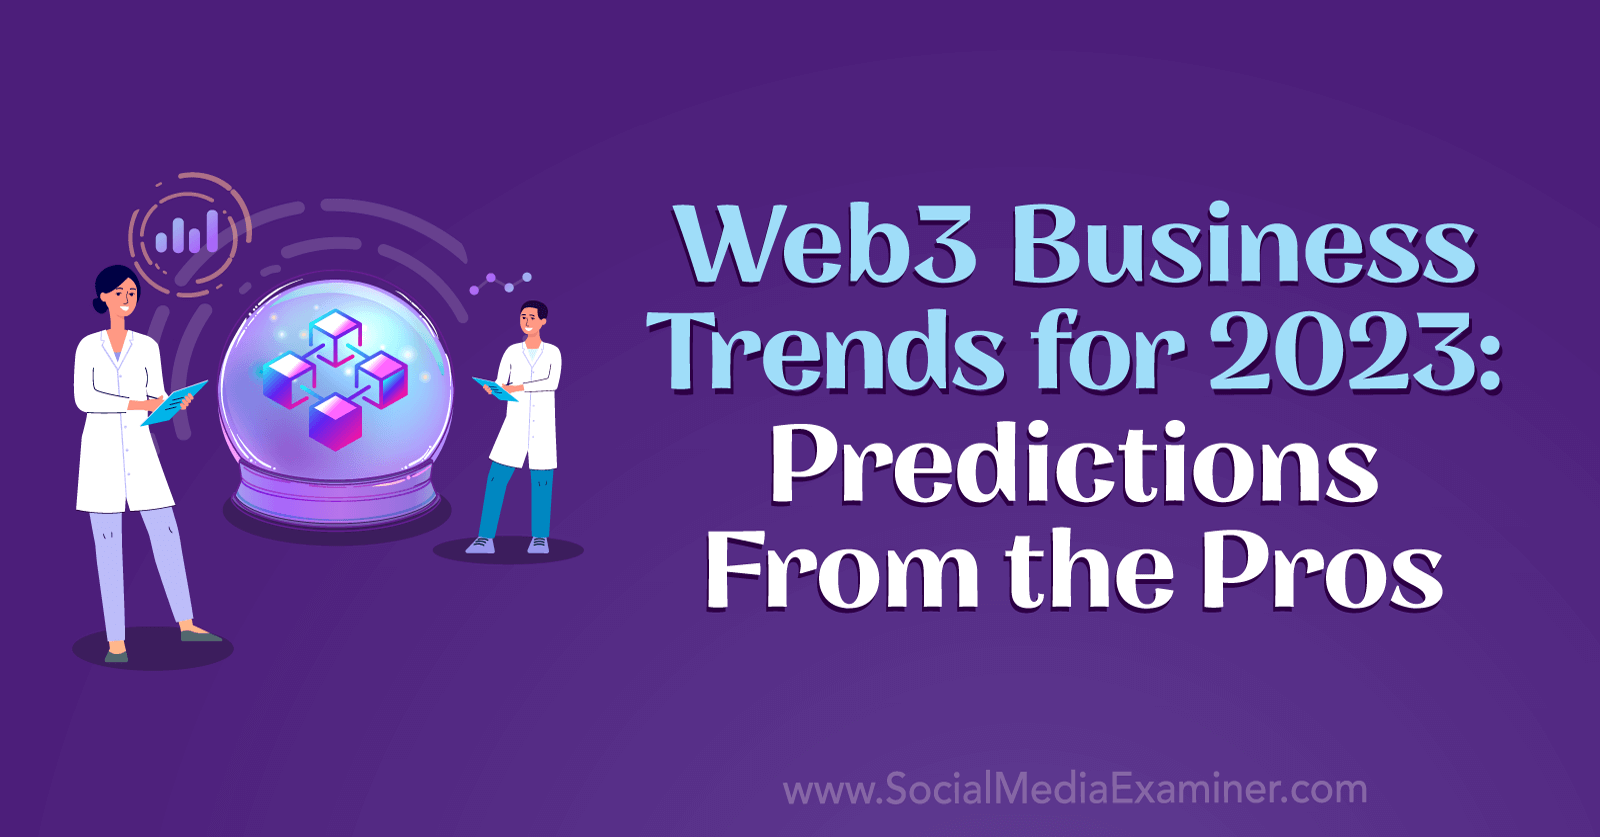 Web3 Business Trends for 2023 Predictions From the Pros Social Media